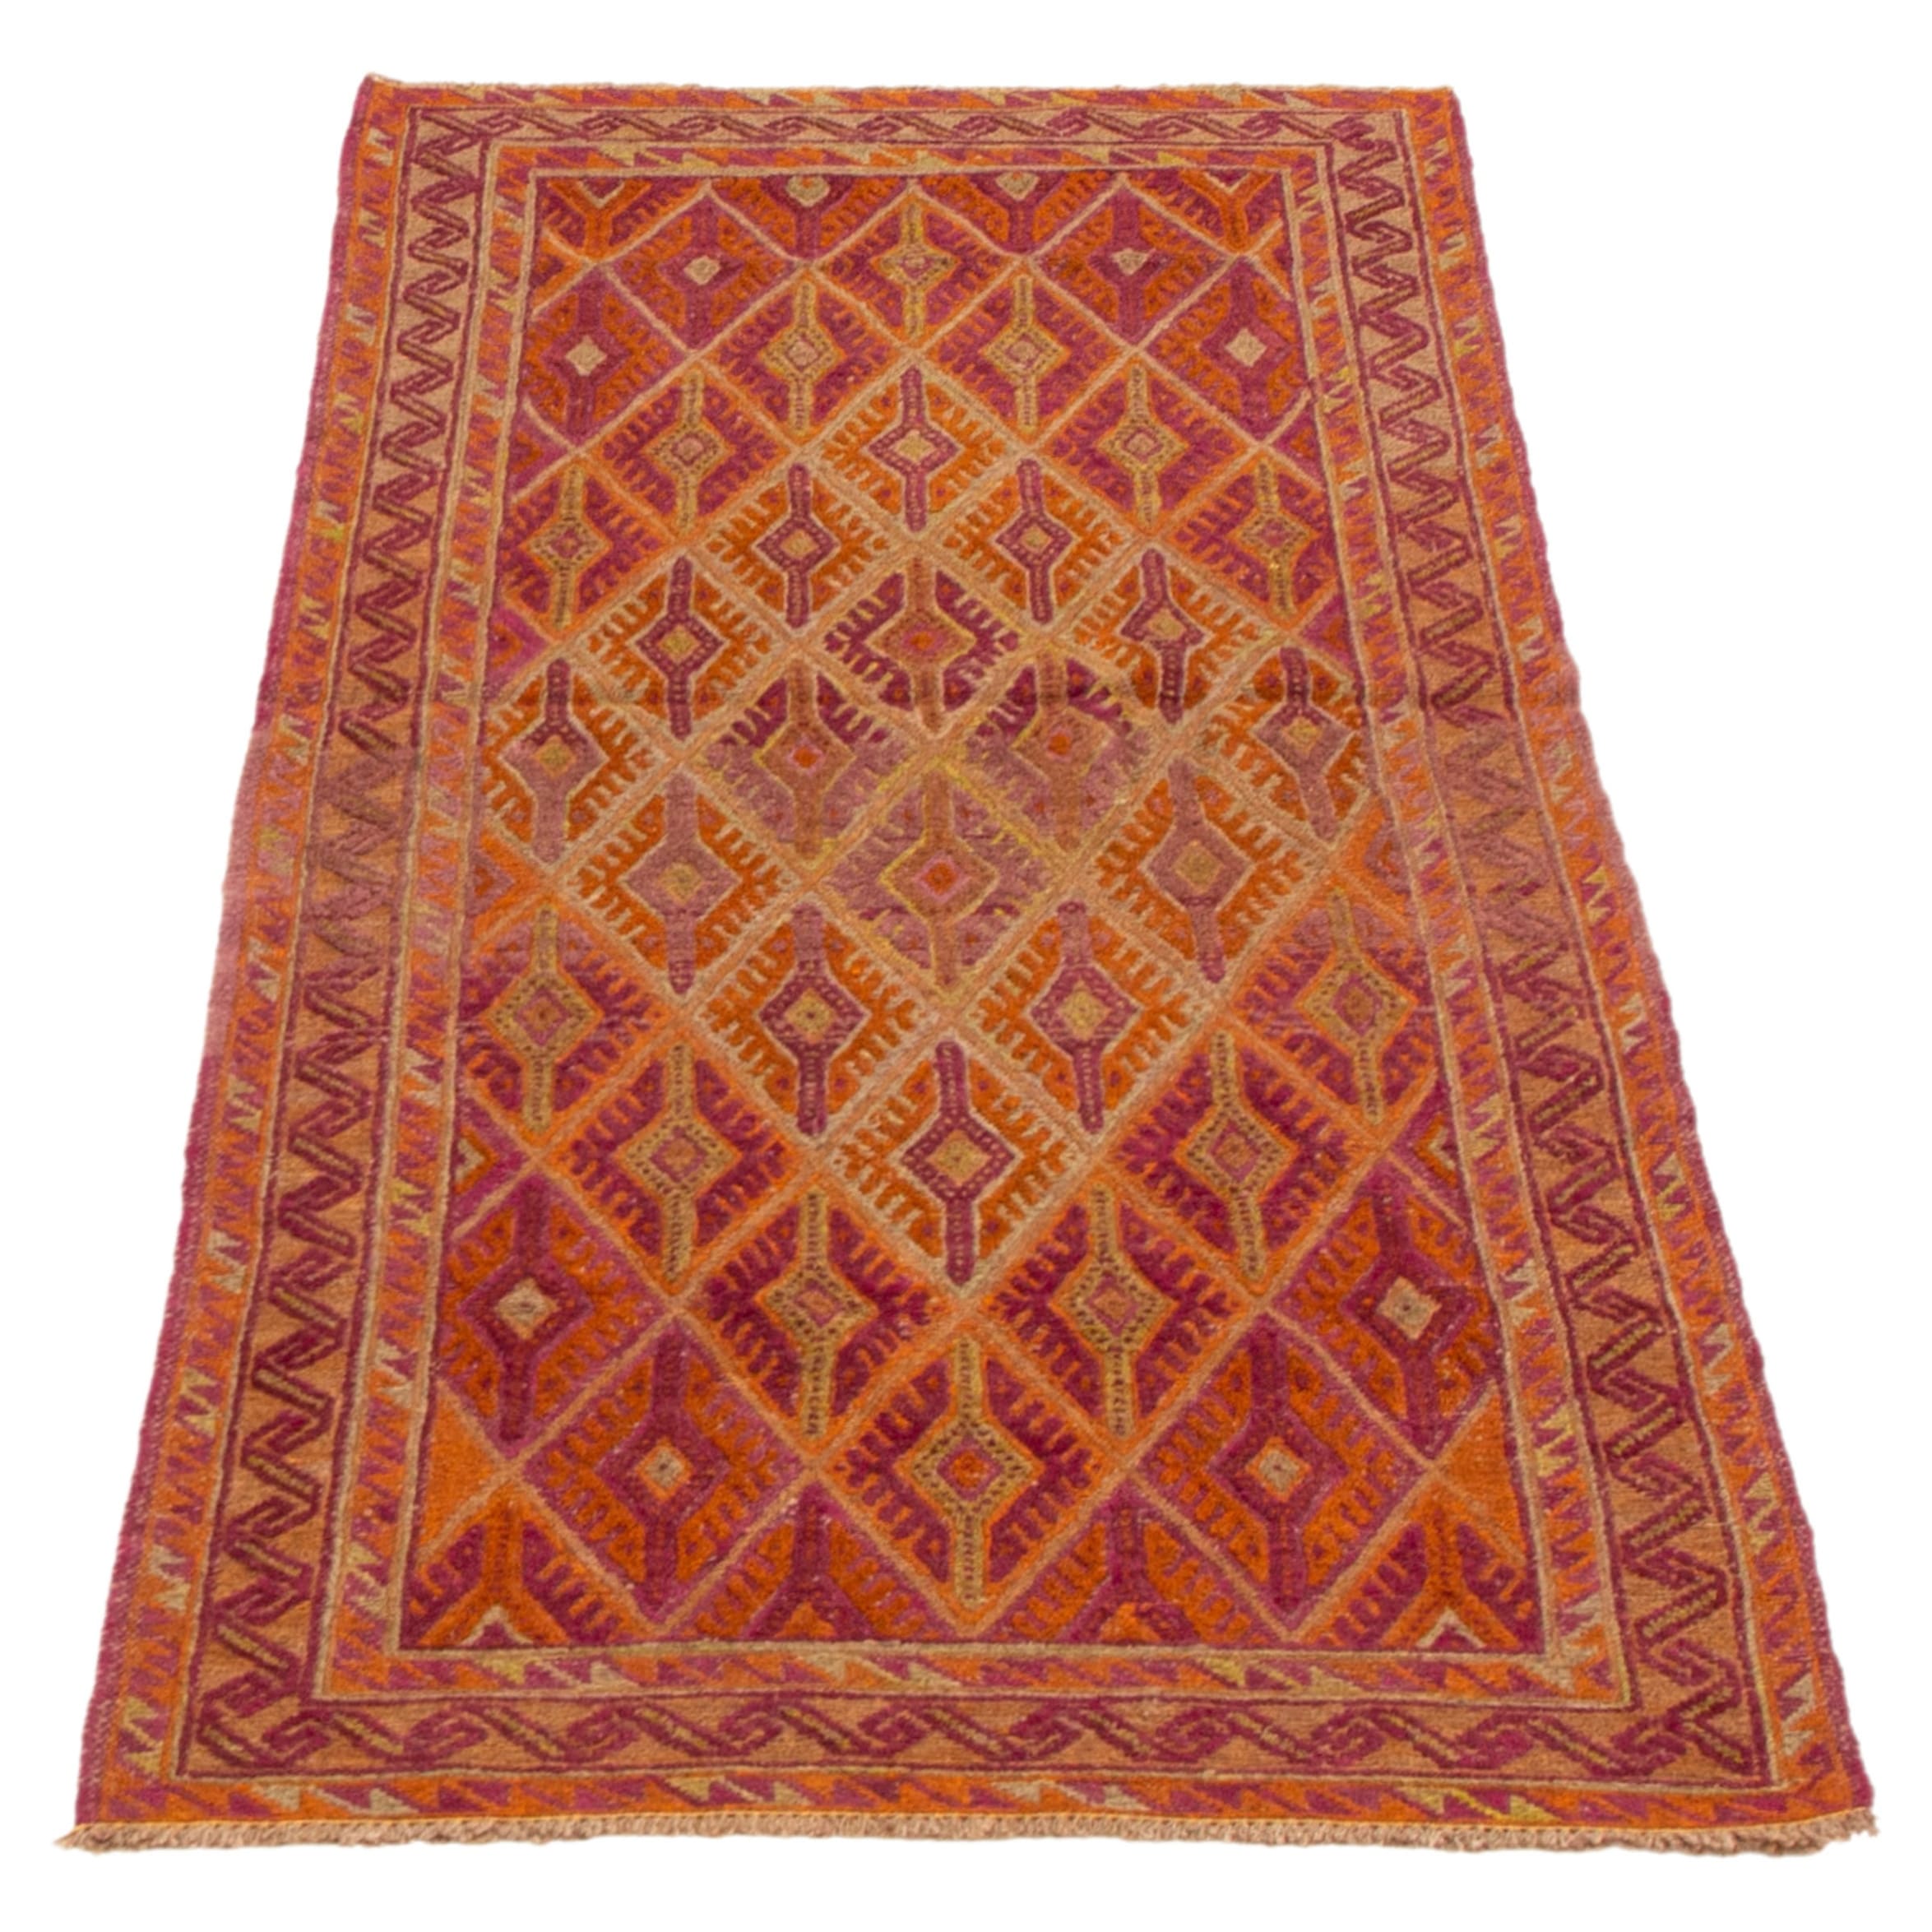 Bordered Red Area Rug 3'1 x 4'11 359375 eCarpet Gallery 